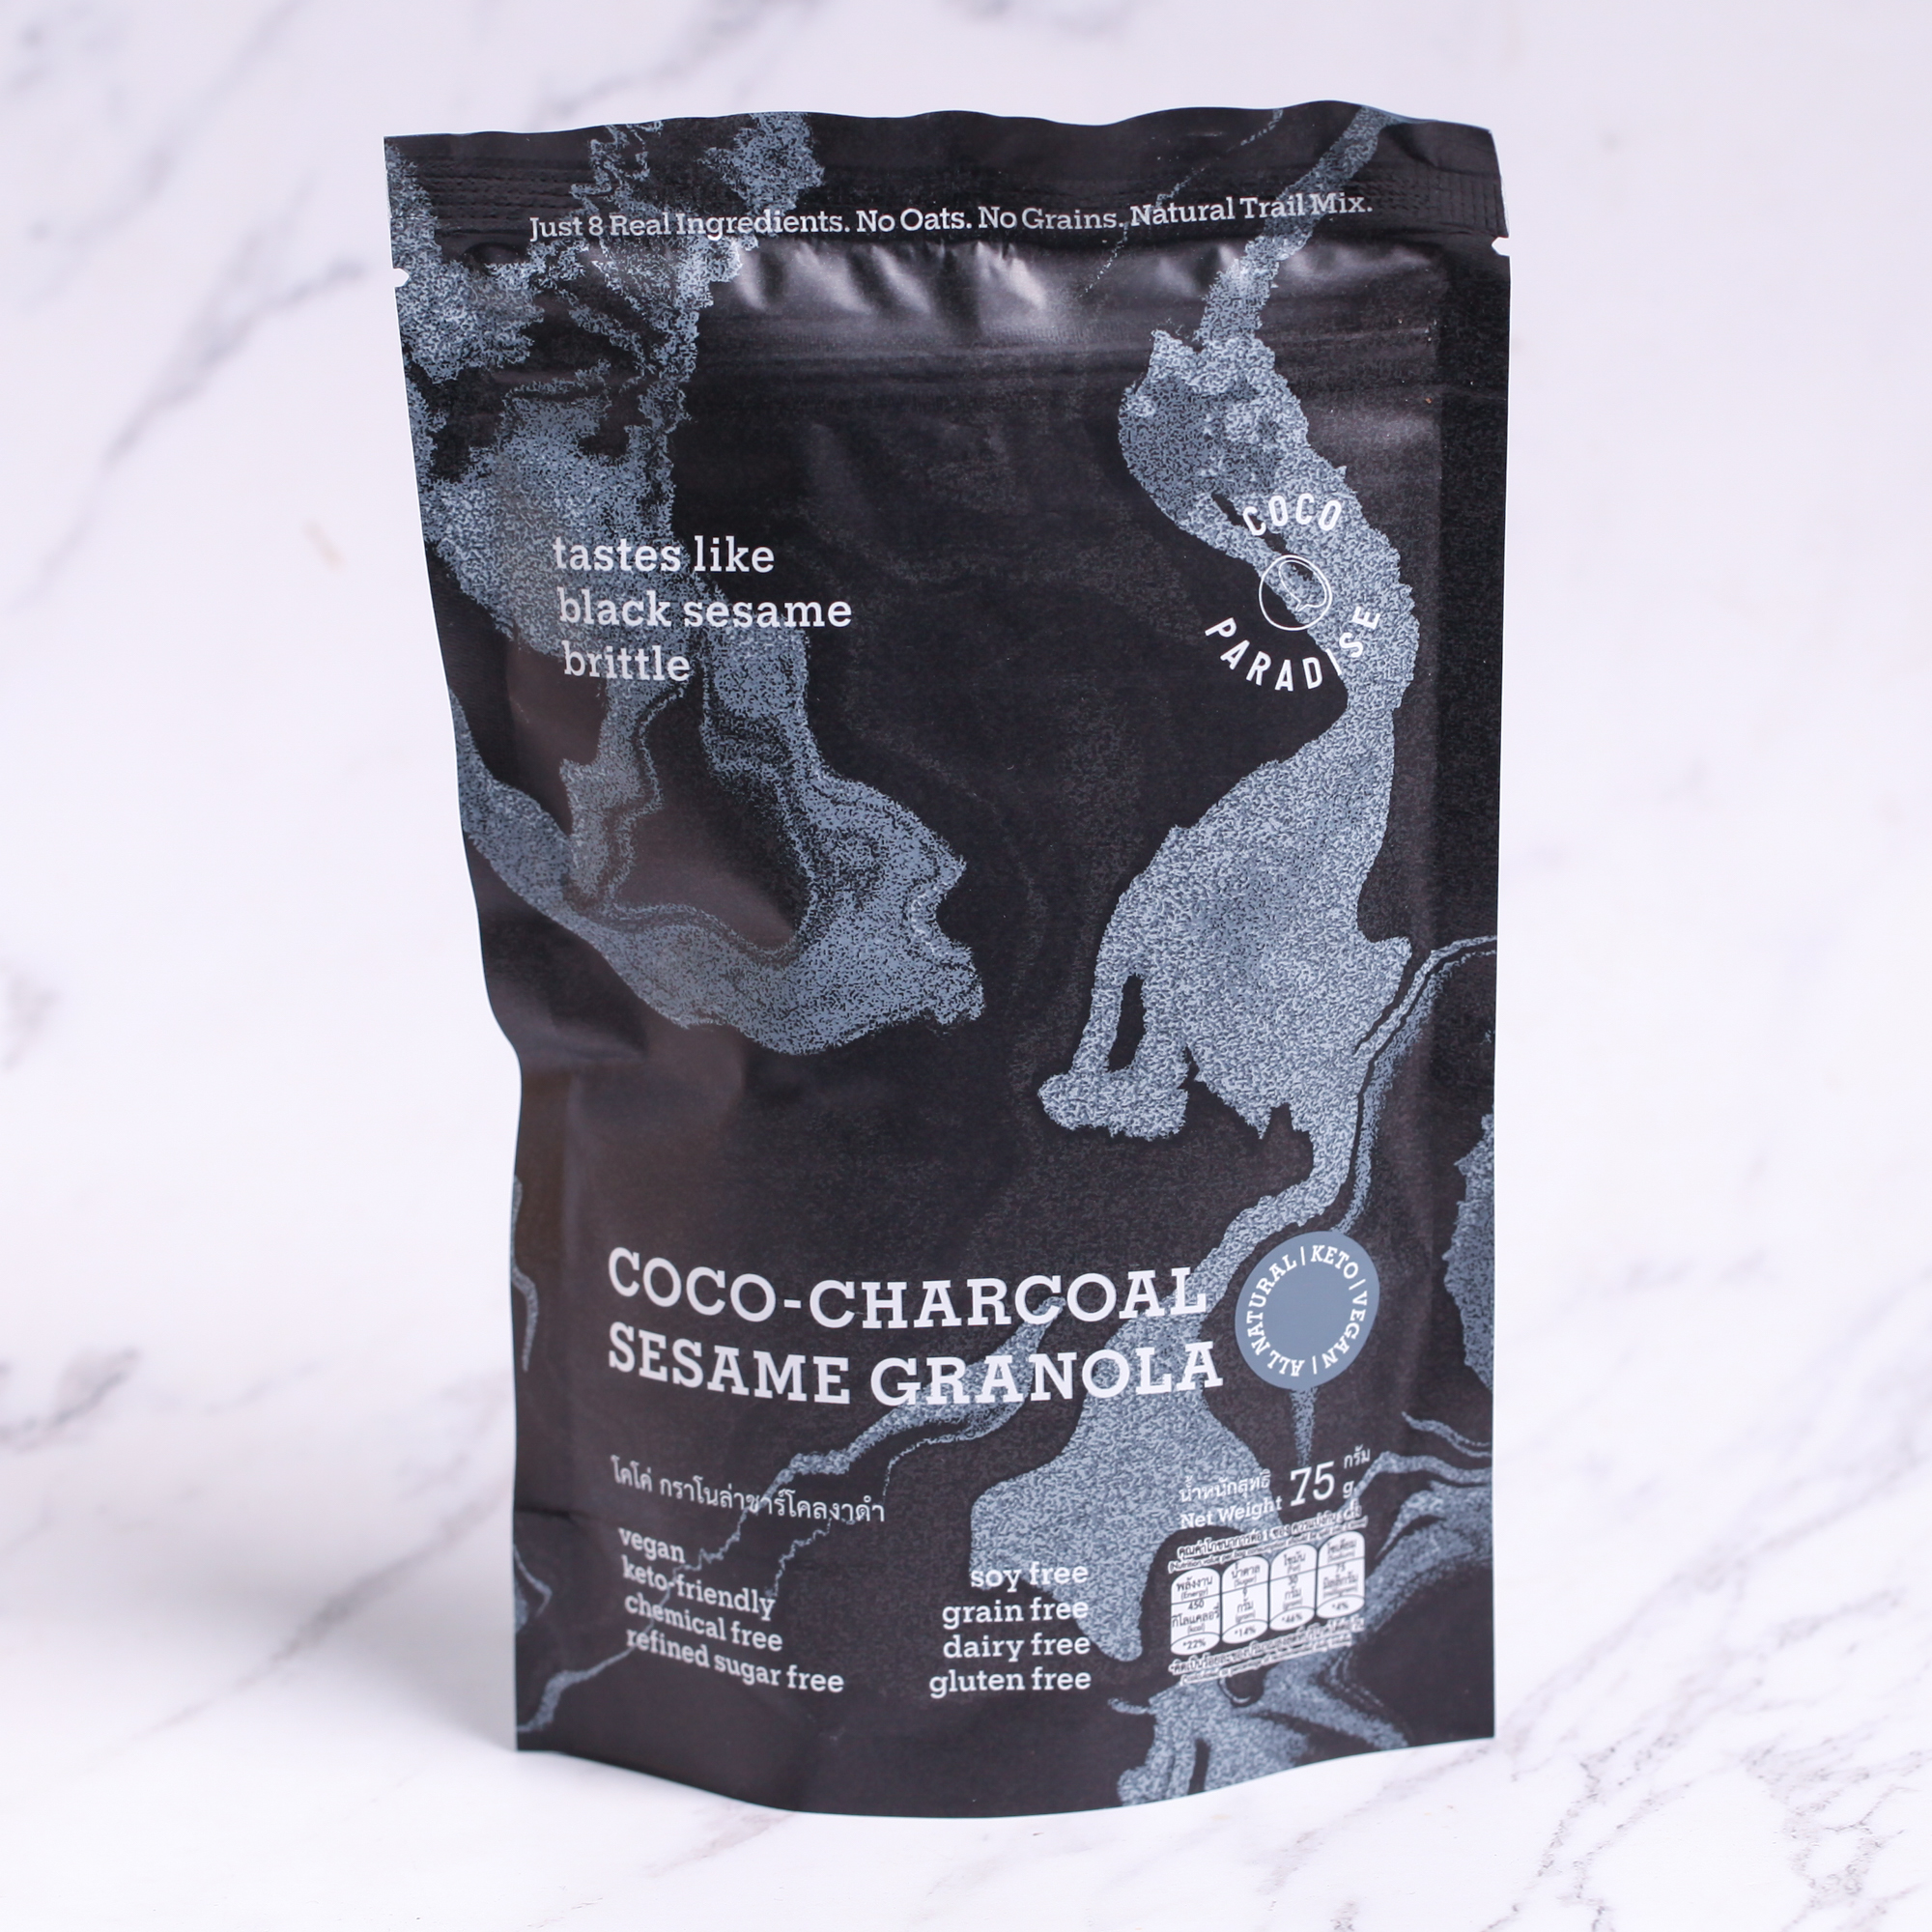 Coco-Charcoal Sesame Granola by Coco Paradise